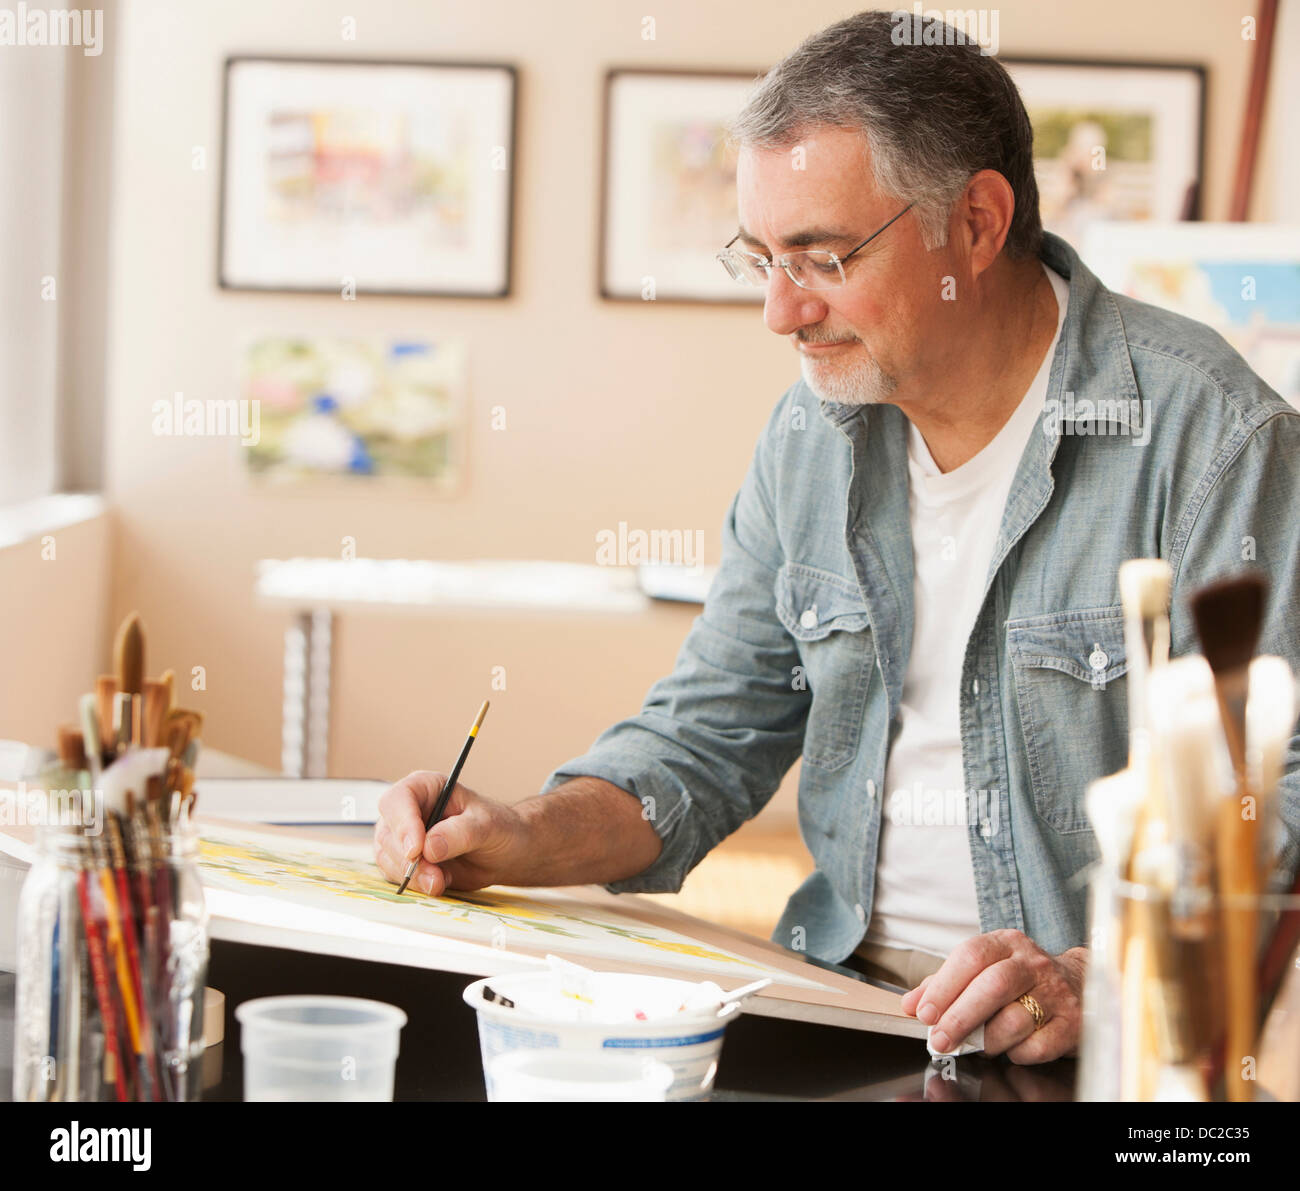 Man painting with watercolors Stock Photo